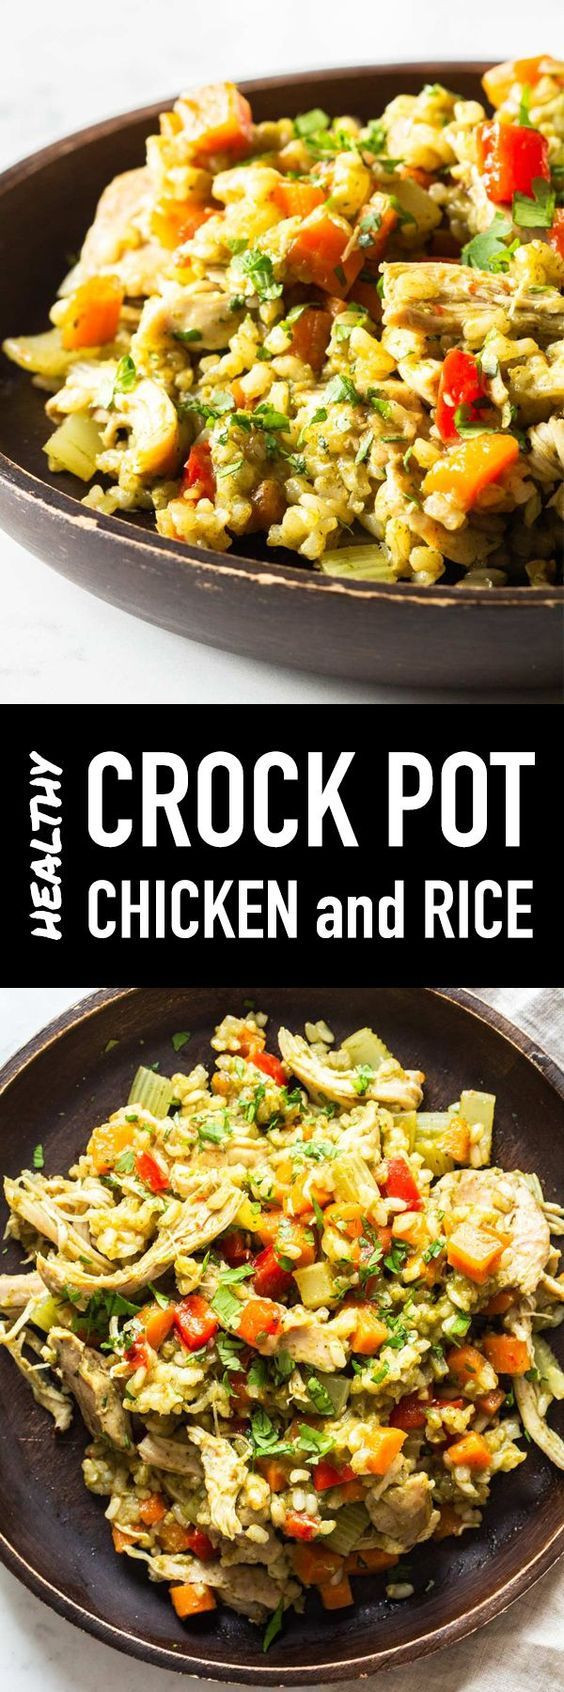 Crockpot Chicken Thighs And Rice
 Crock Pot Chicken and Rice Recipe